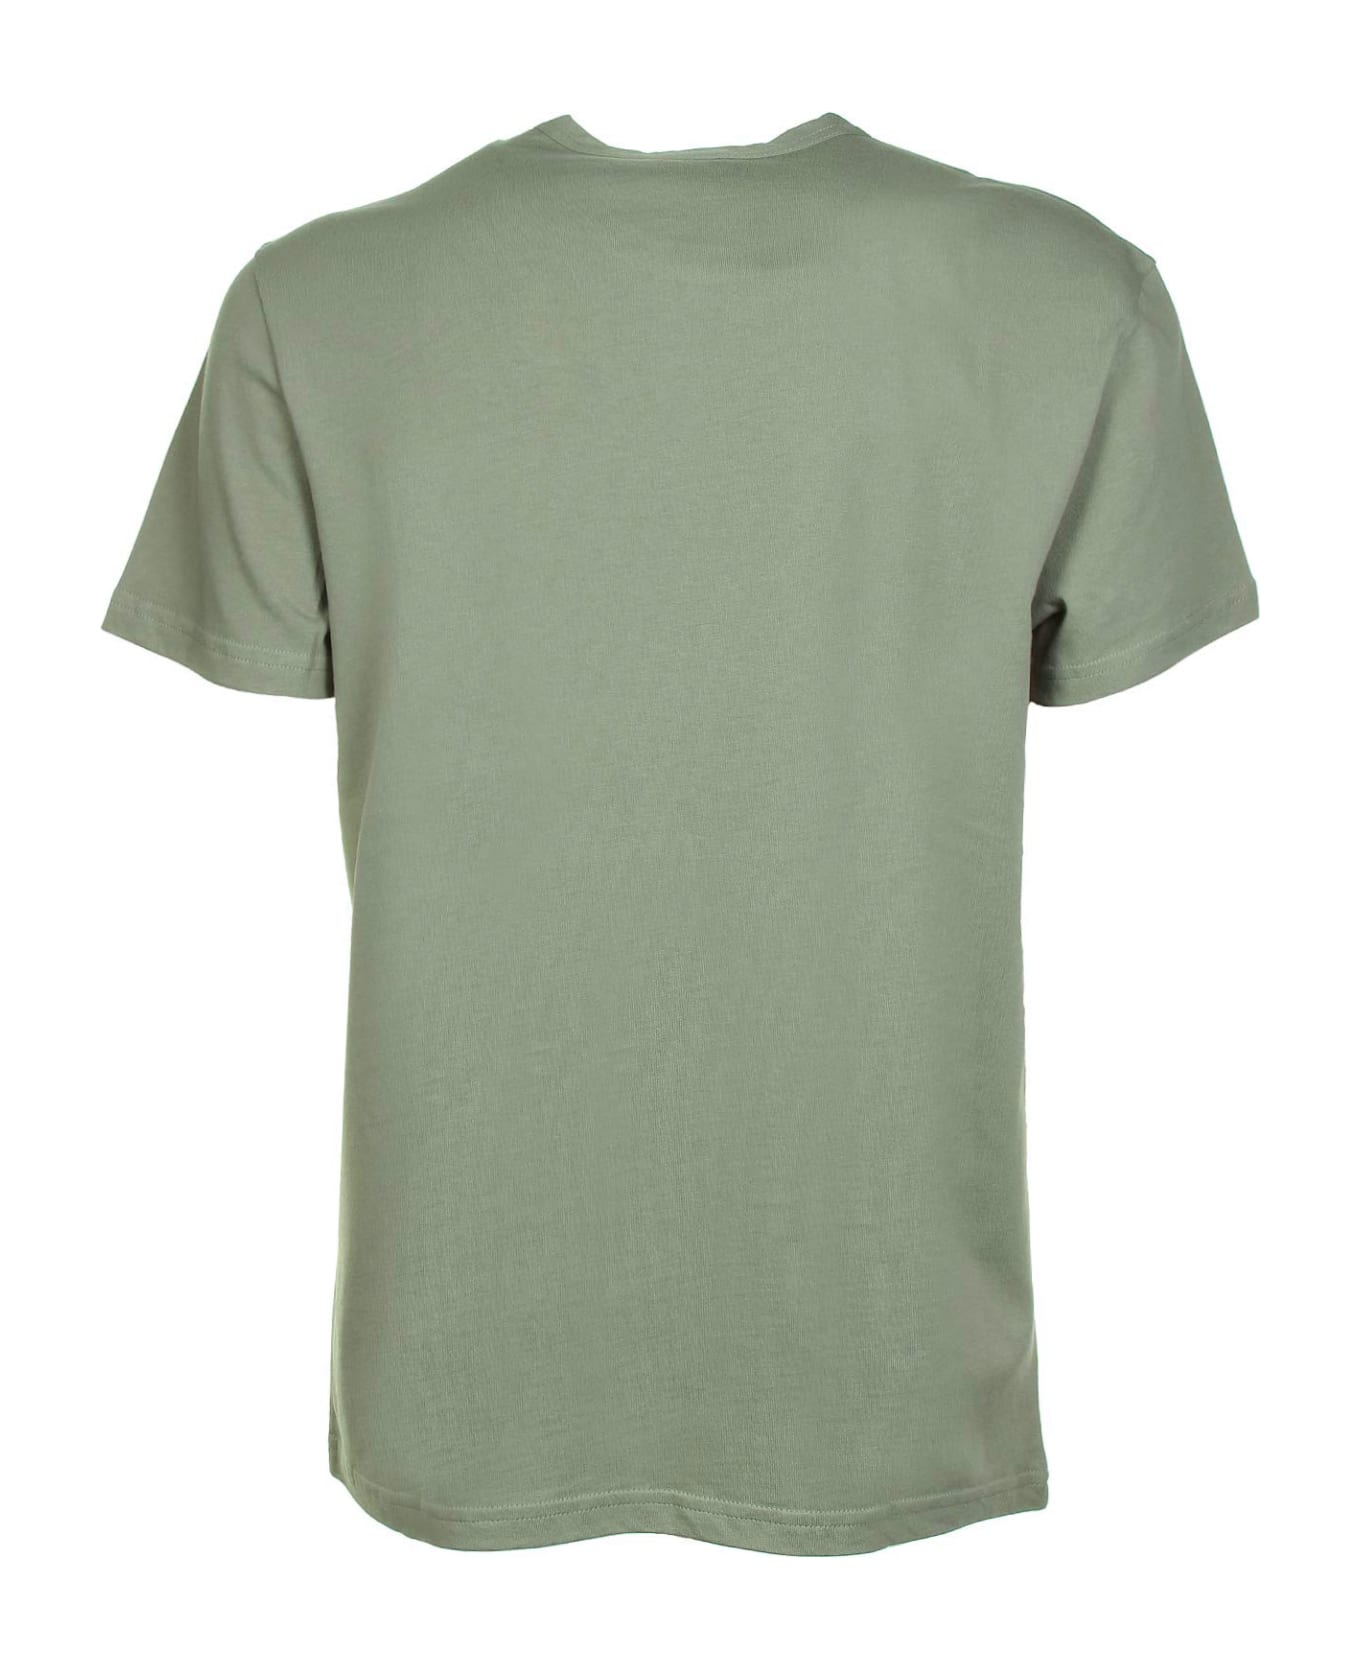 Fay Archive T-shirt - MILITARE